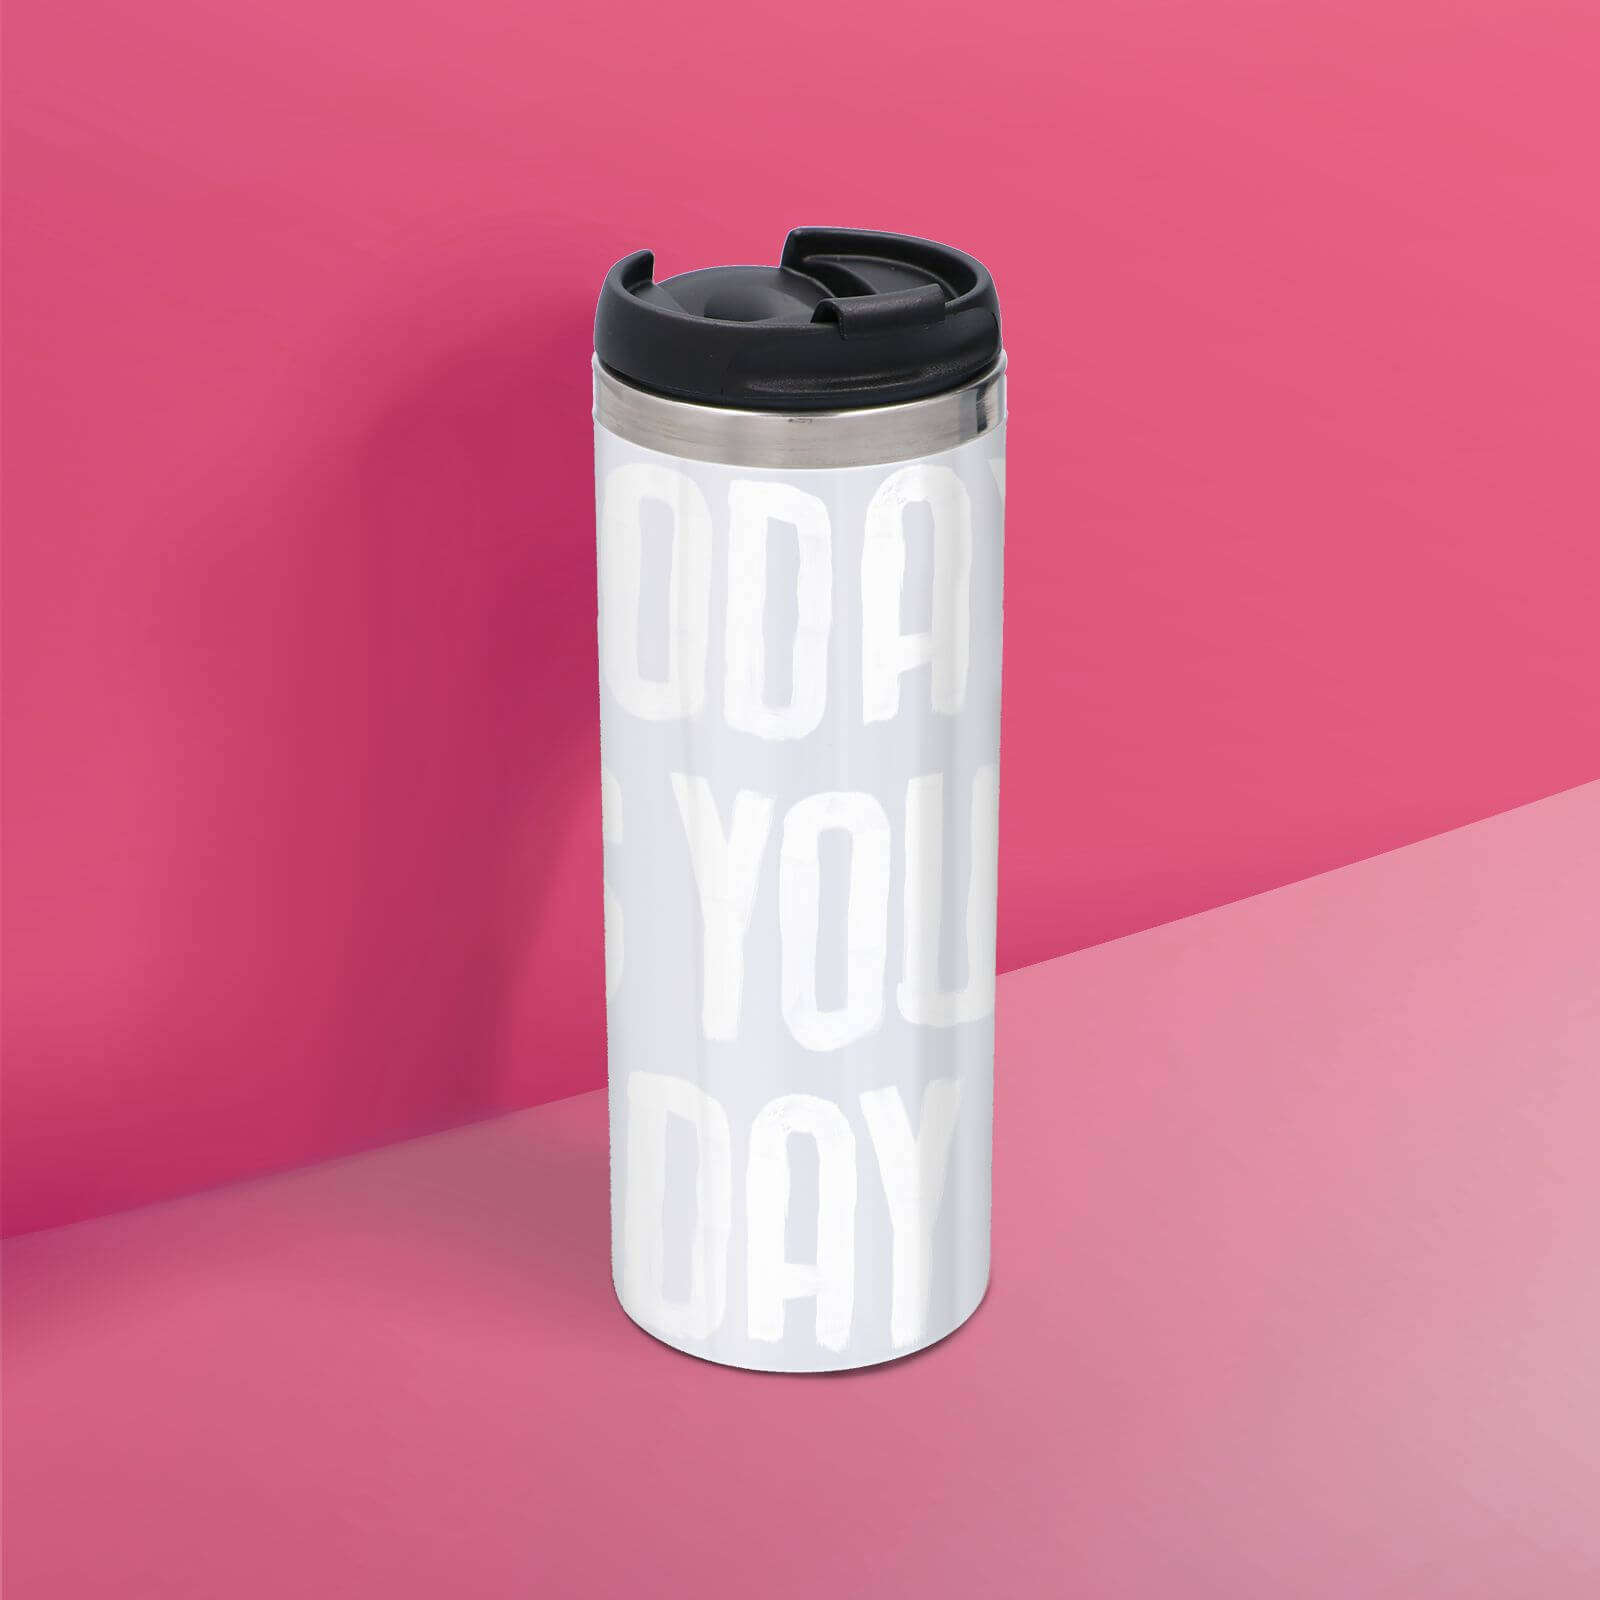 The Motivated Type Today Is Your Day Thermo Travel Mug